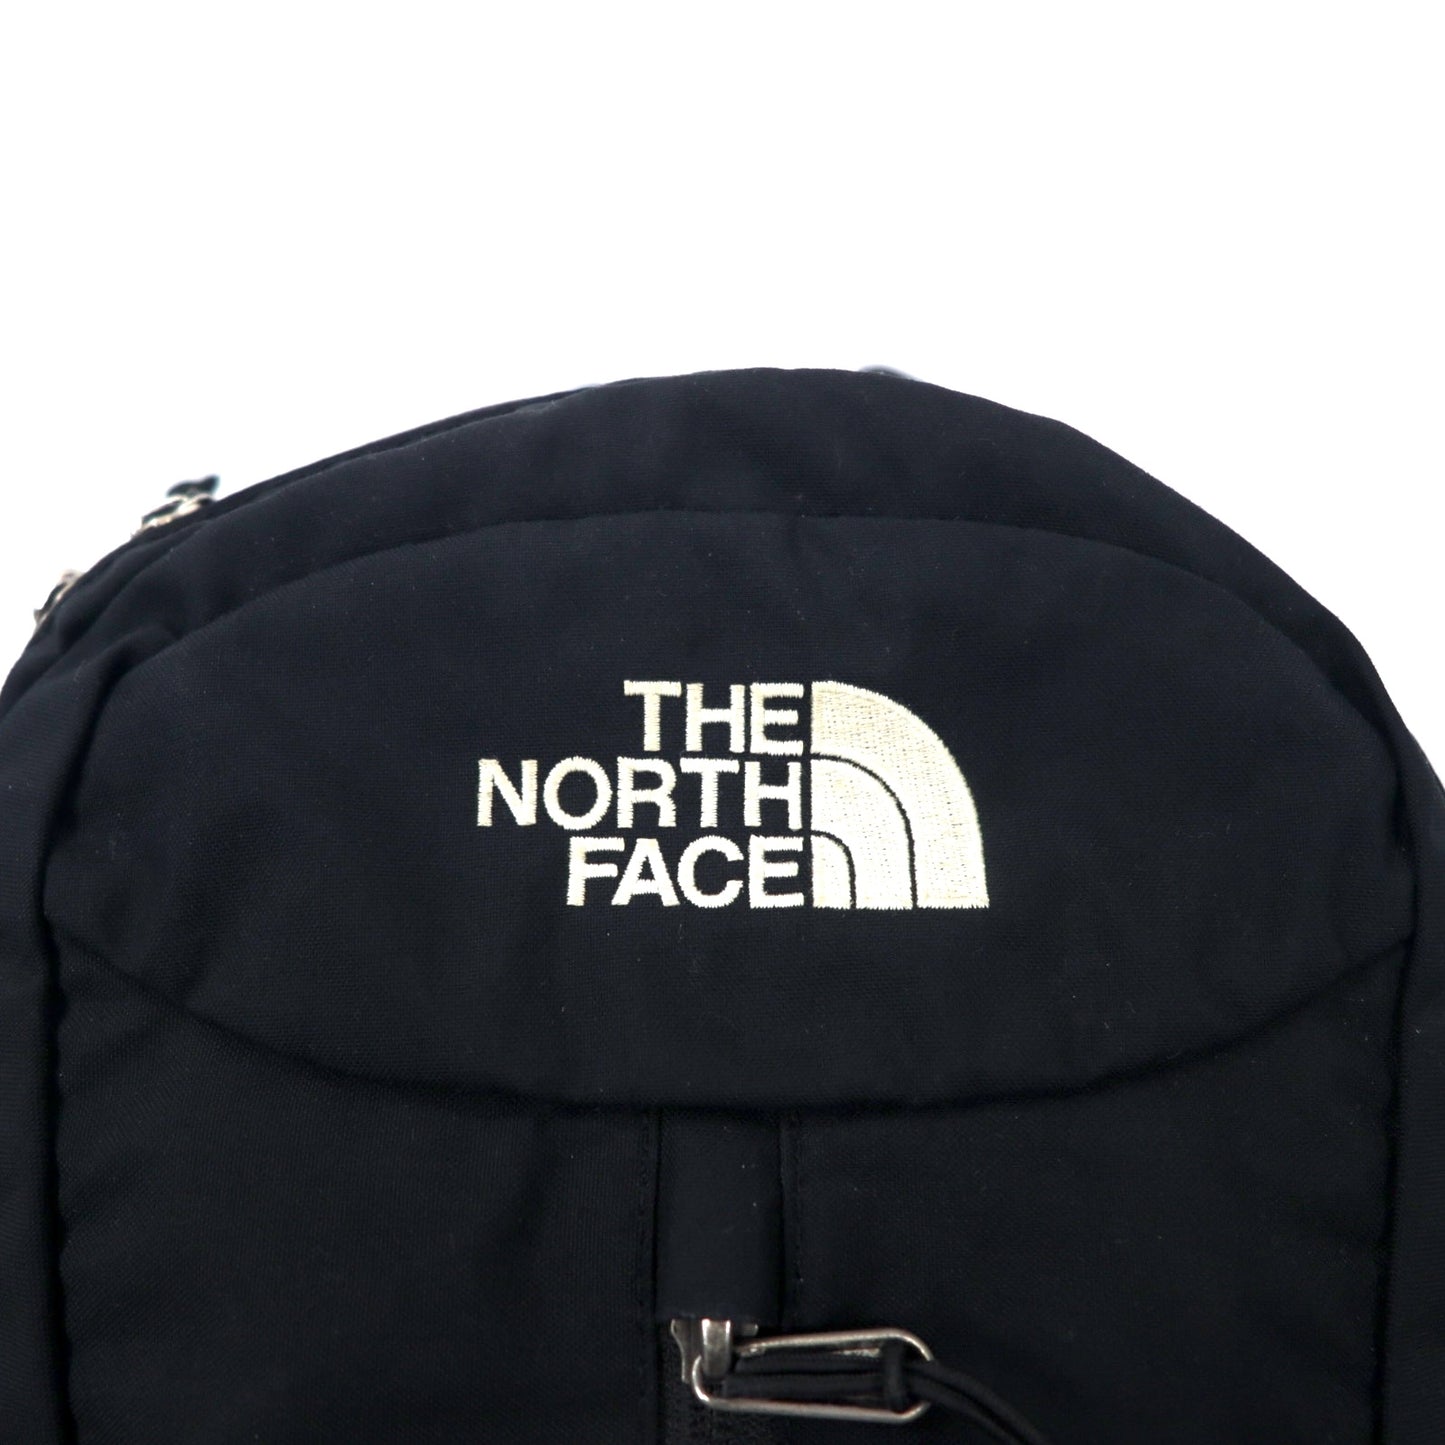 THE NORTH FACE ジェミニ20 バックパック リュックサック 22L ブラック ナイロン ロゴ刺繍 GEMINI20 DAY PACK NM71402